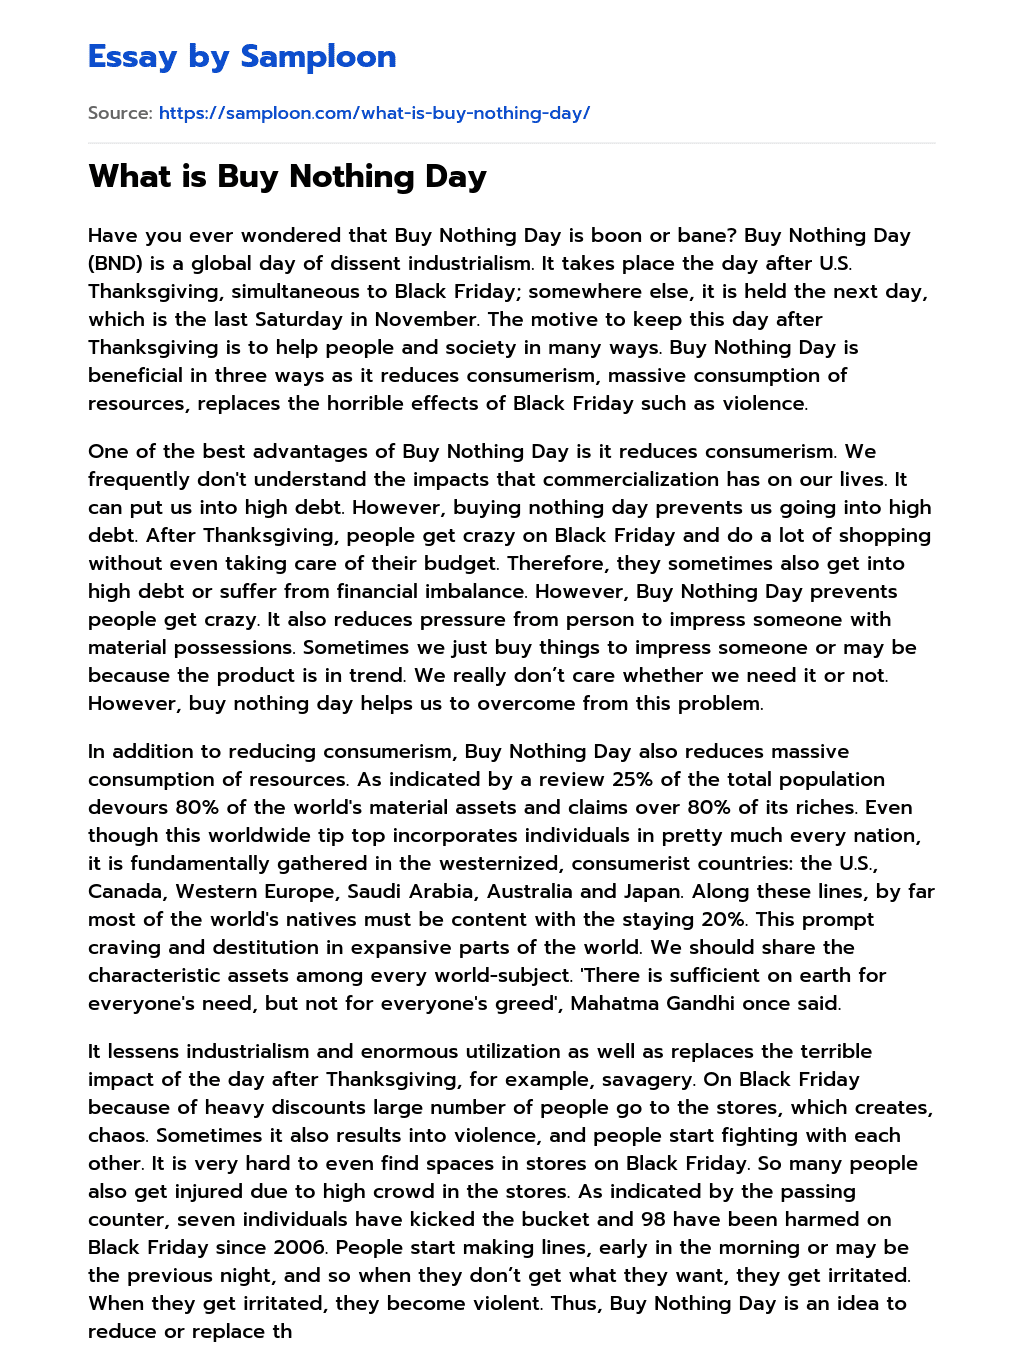 What is Buy Nothing Day essay